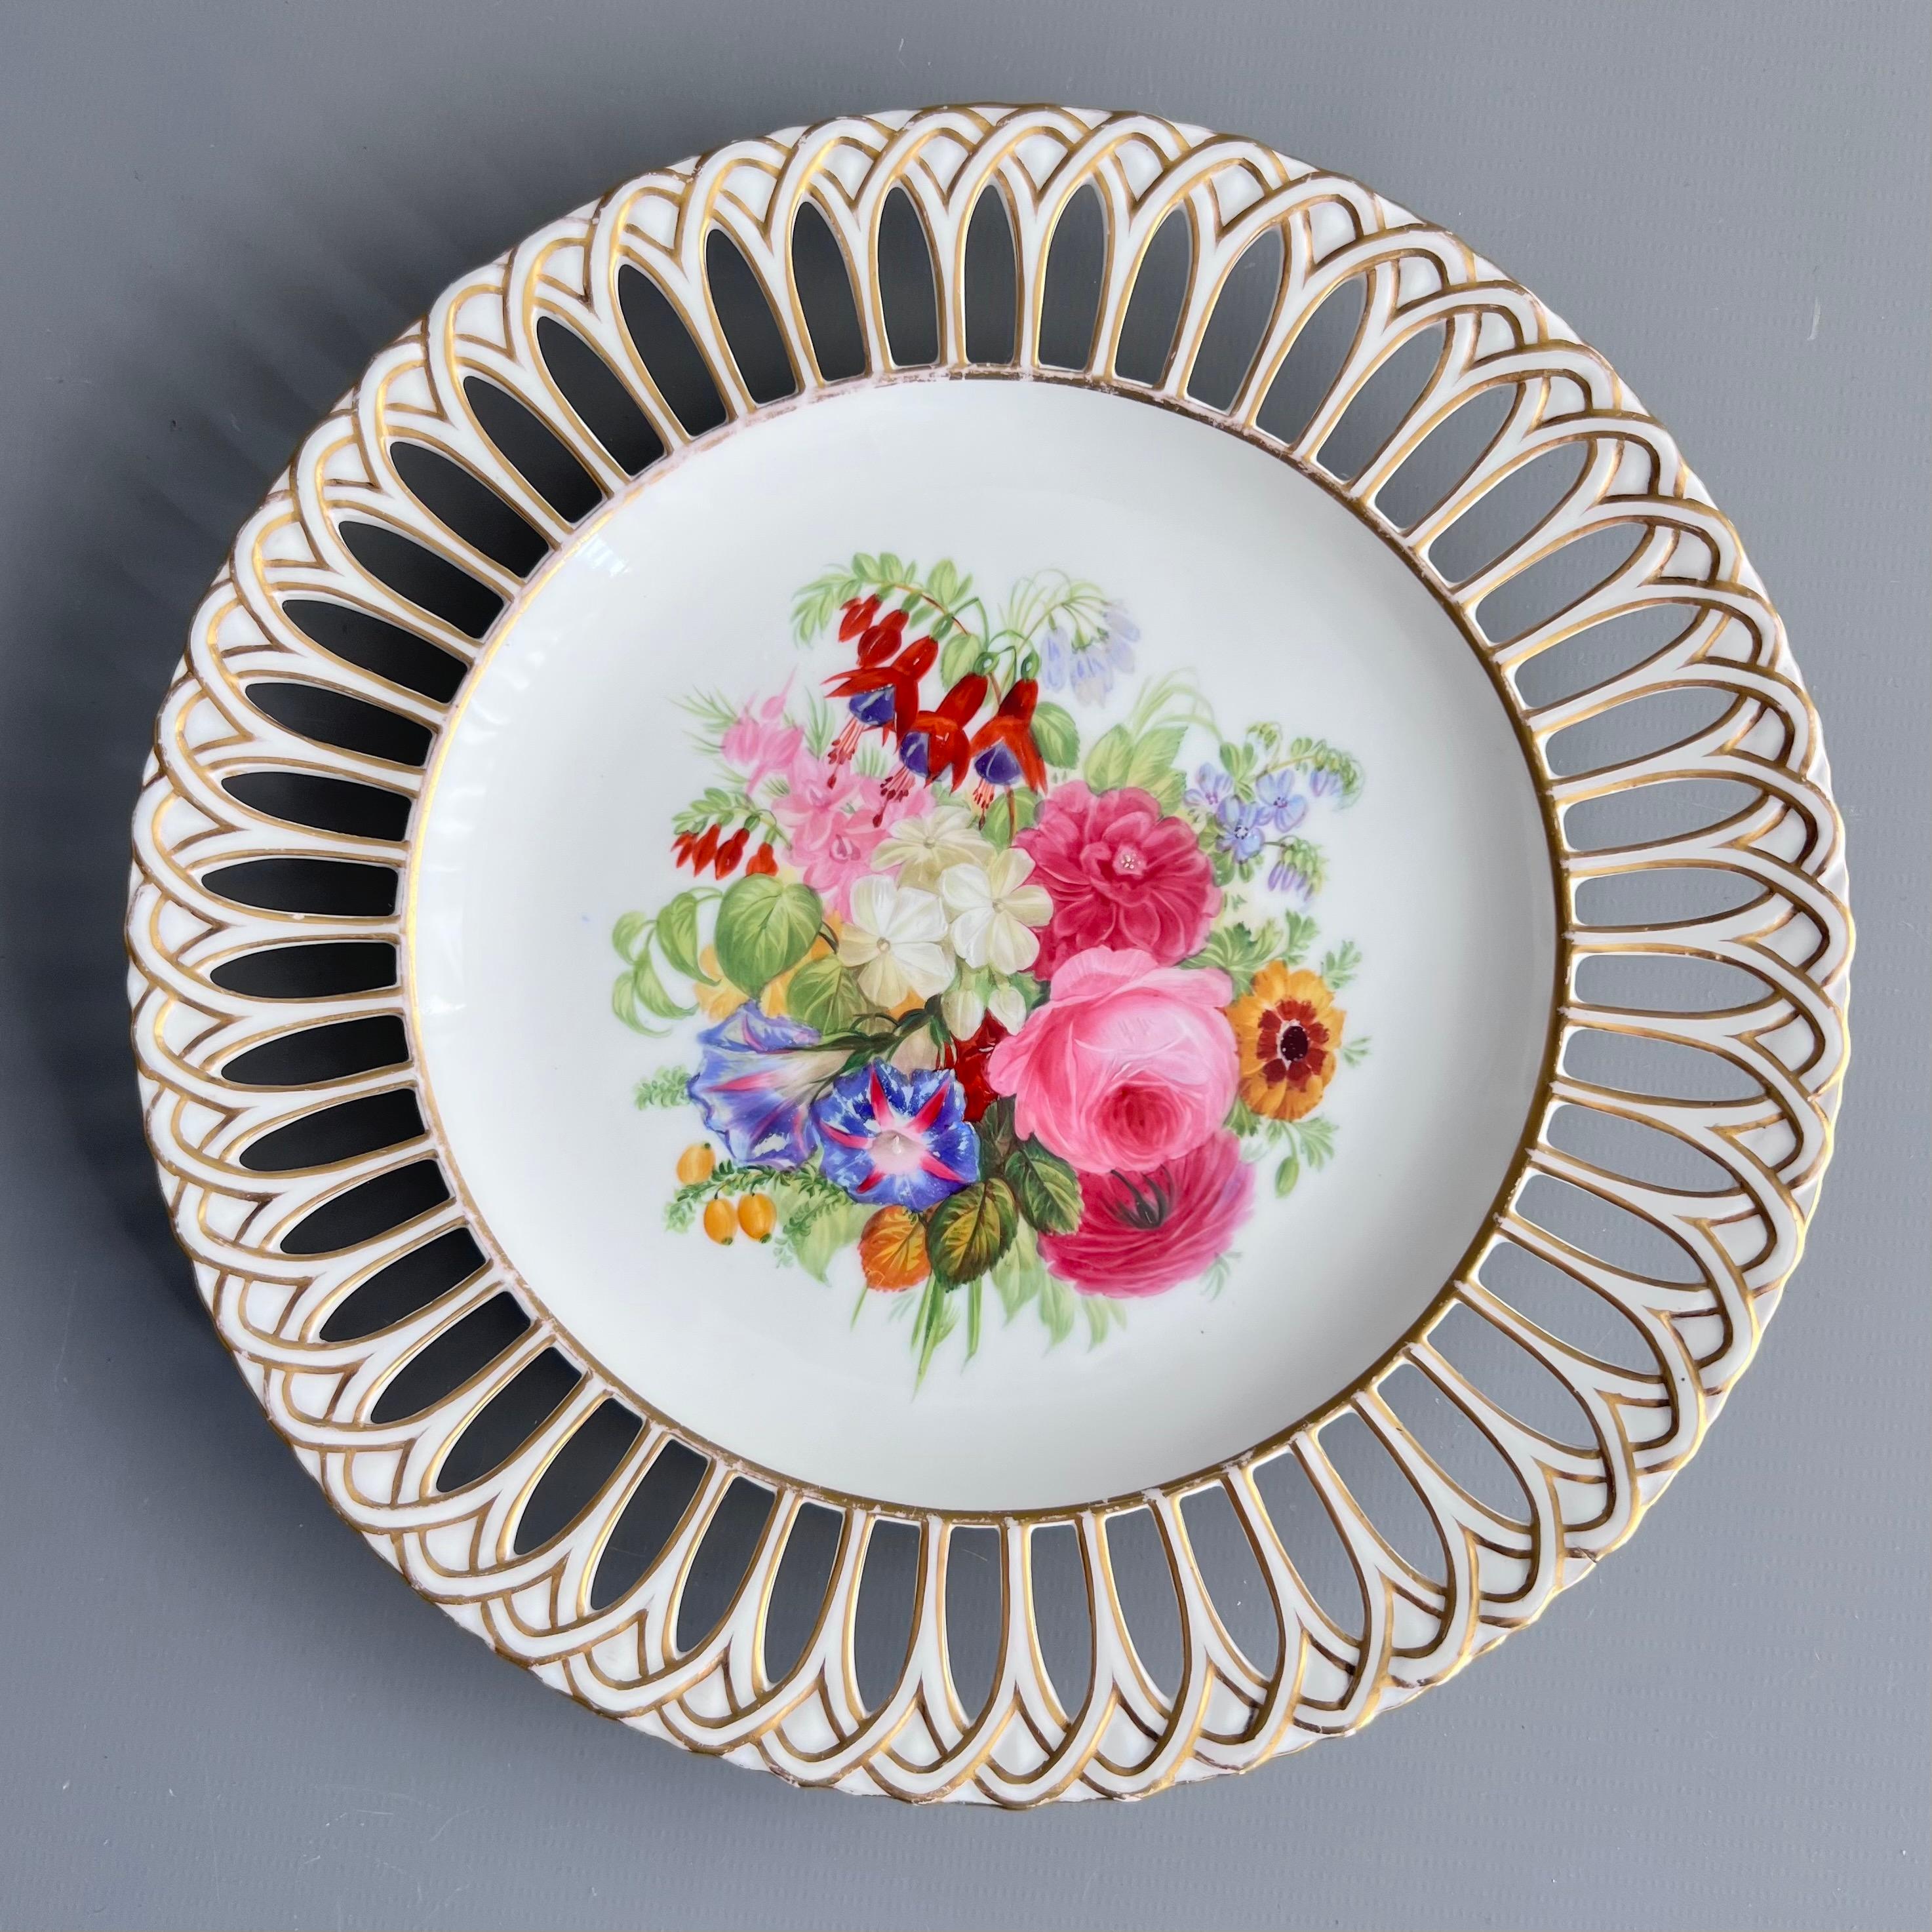 Copeland Set of 8 plates, Reticulated, Sublime Flowers by Greatbatch, 1848 For Sale 5